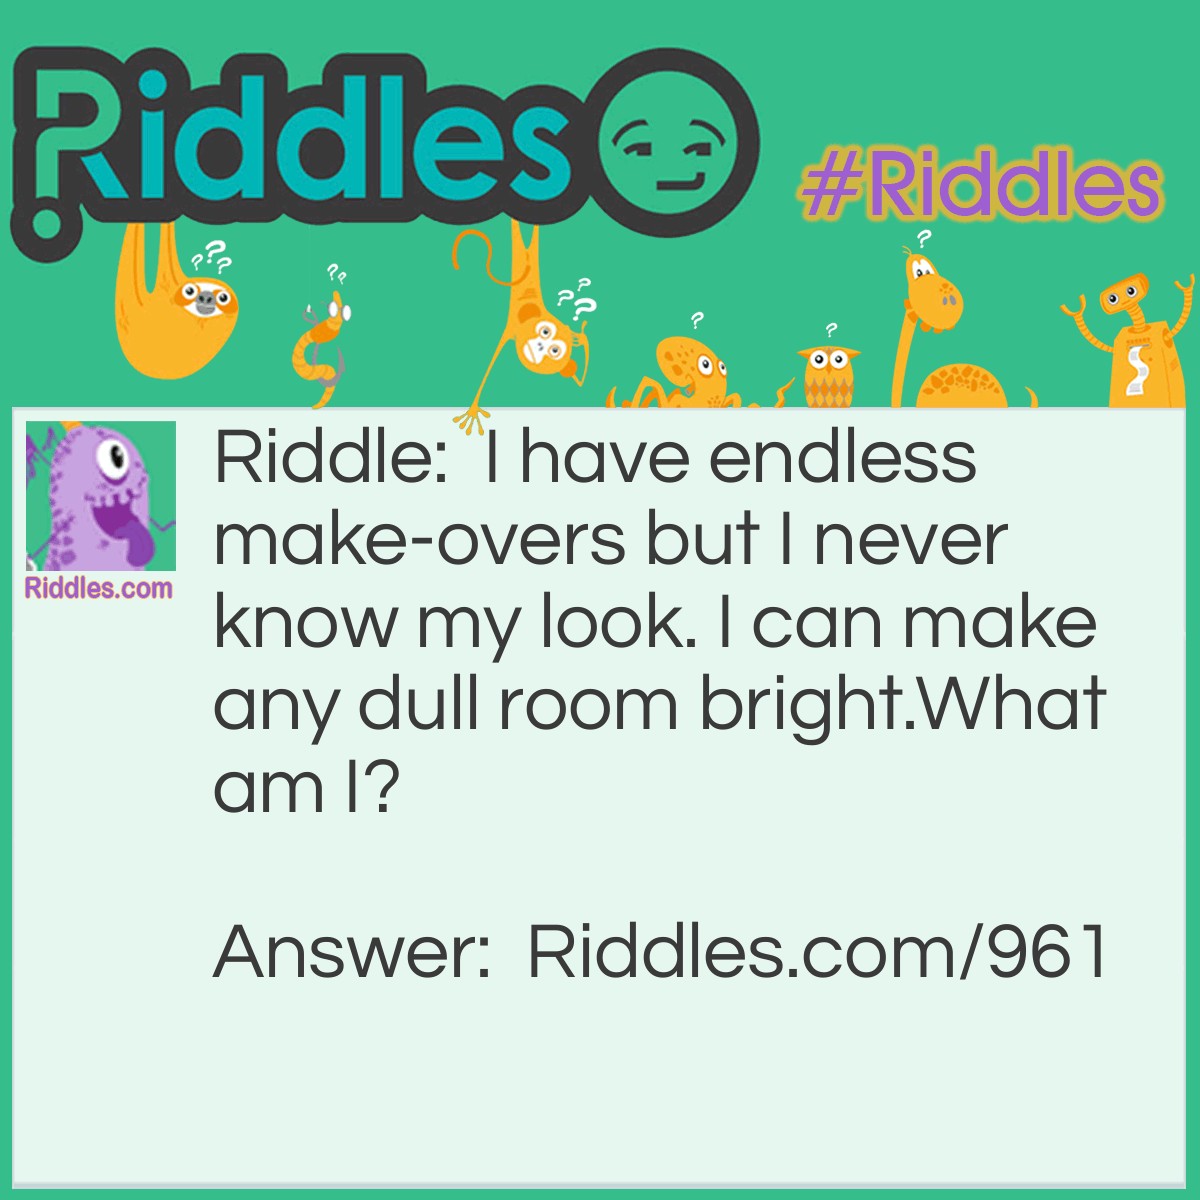 Riddle: I have endless make-overs but I never know my look. I can make any dull room bright.
What am I? Answer: A painted wall.